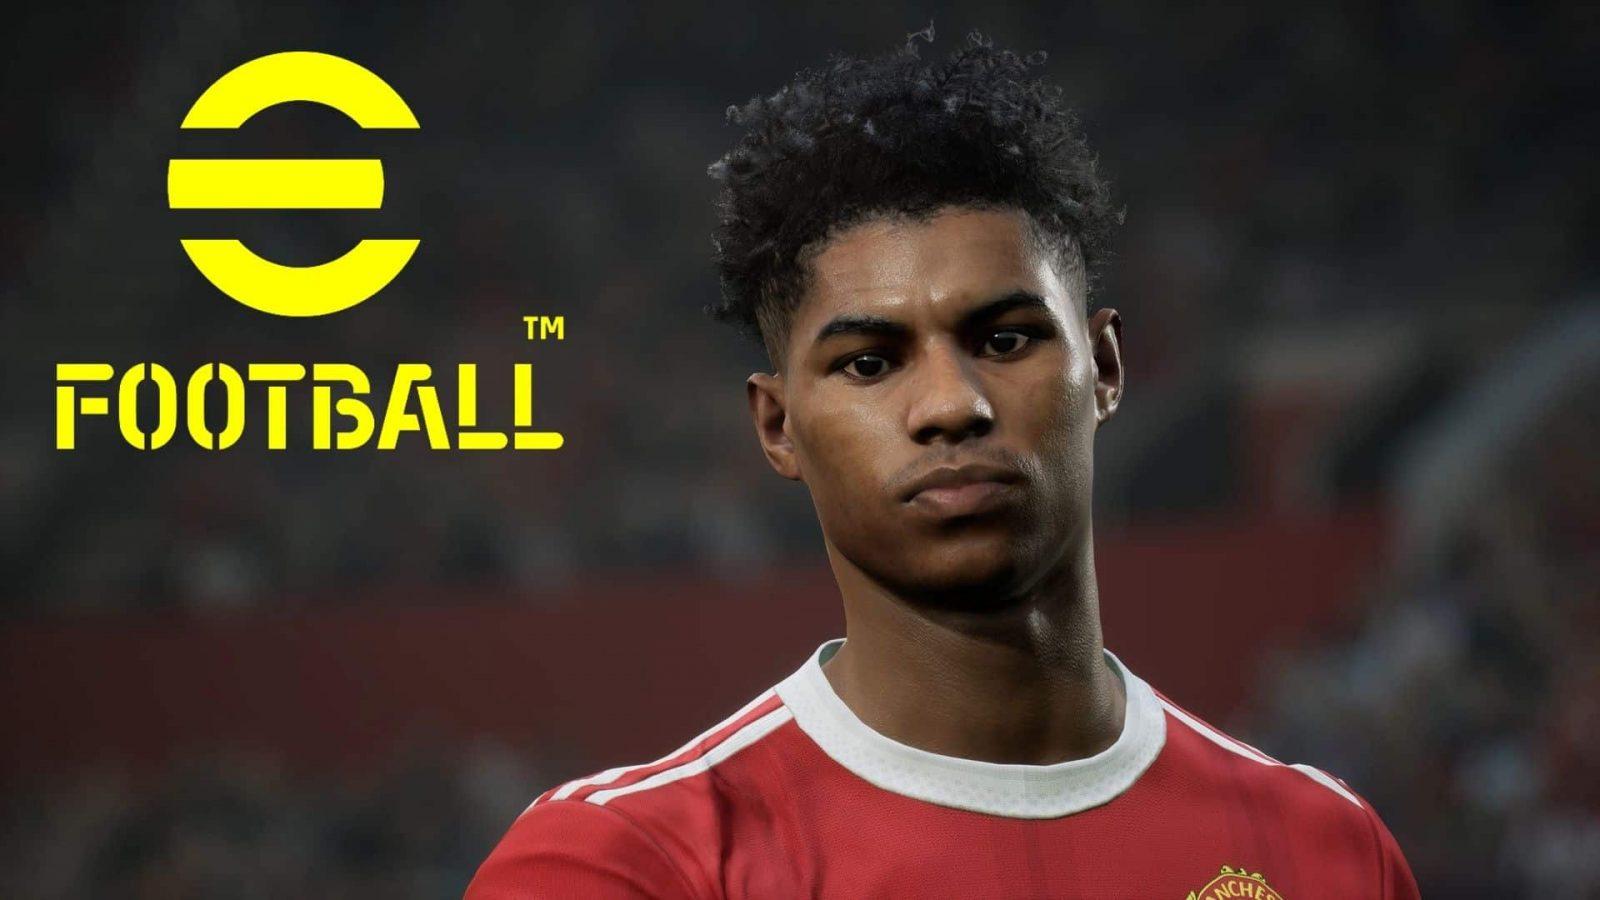 FIFA 22 Patch 4 Coming Soon For All Platforms - Patch Notes